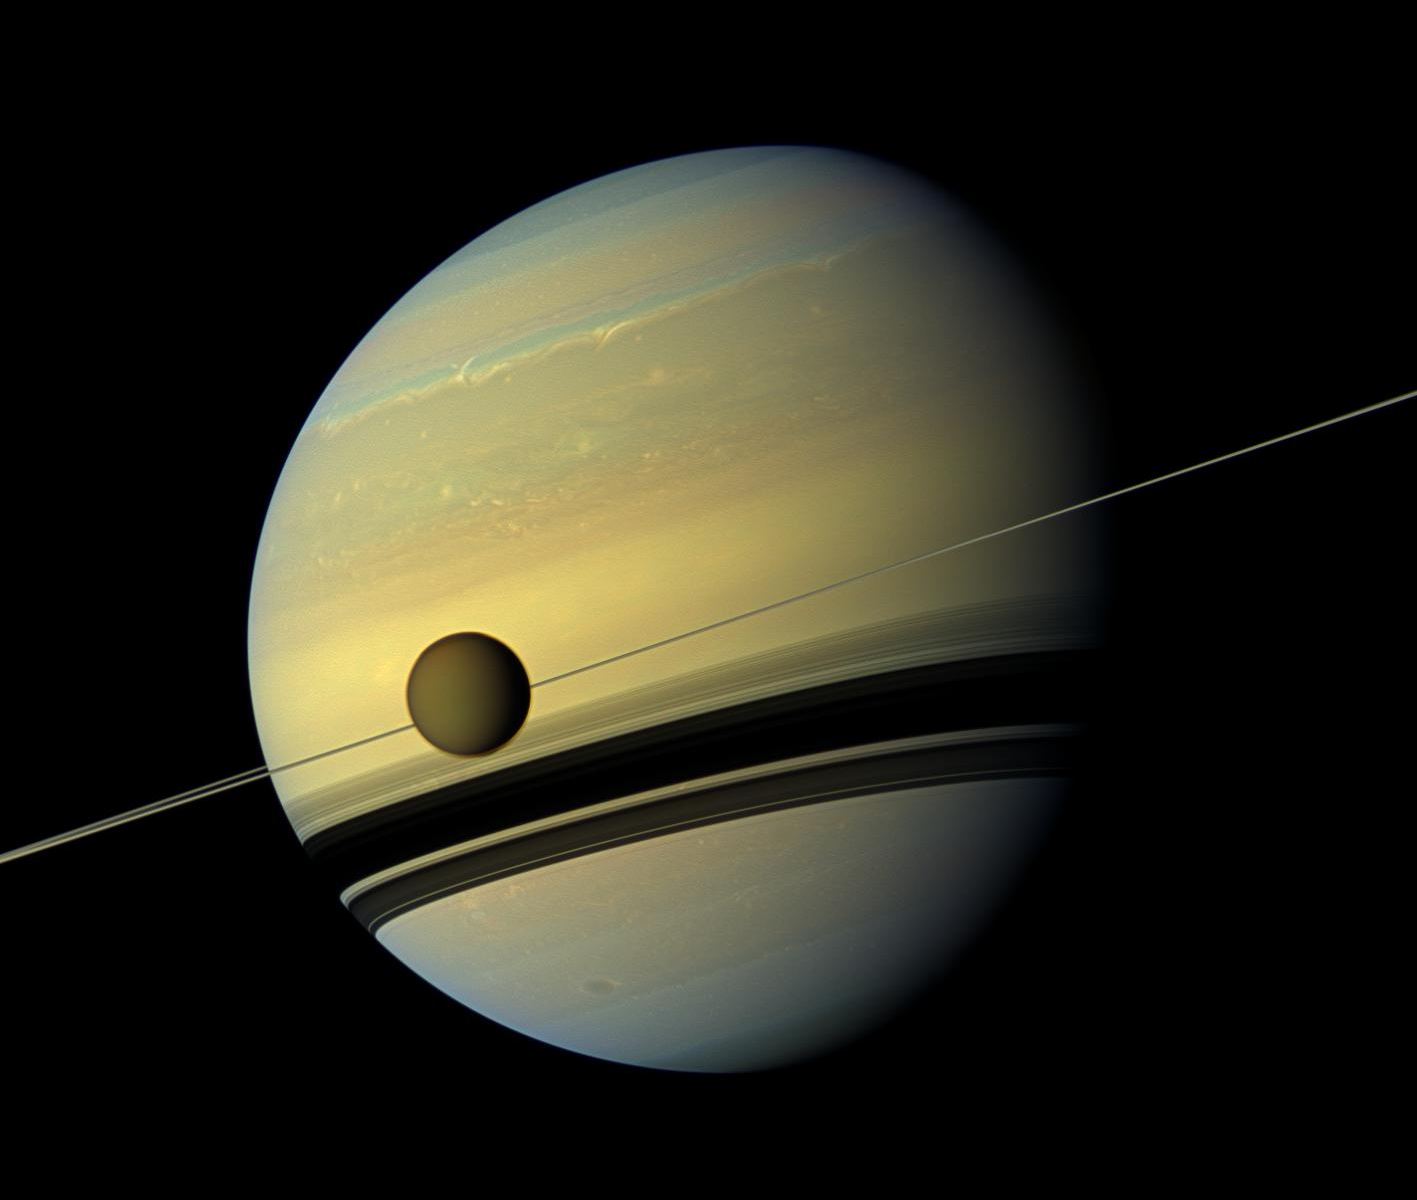 Titan in front of Saturn. Image Credit: NASA/JPL-Caltech/Space Science Institute